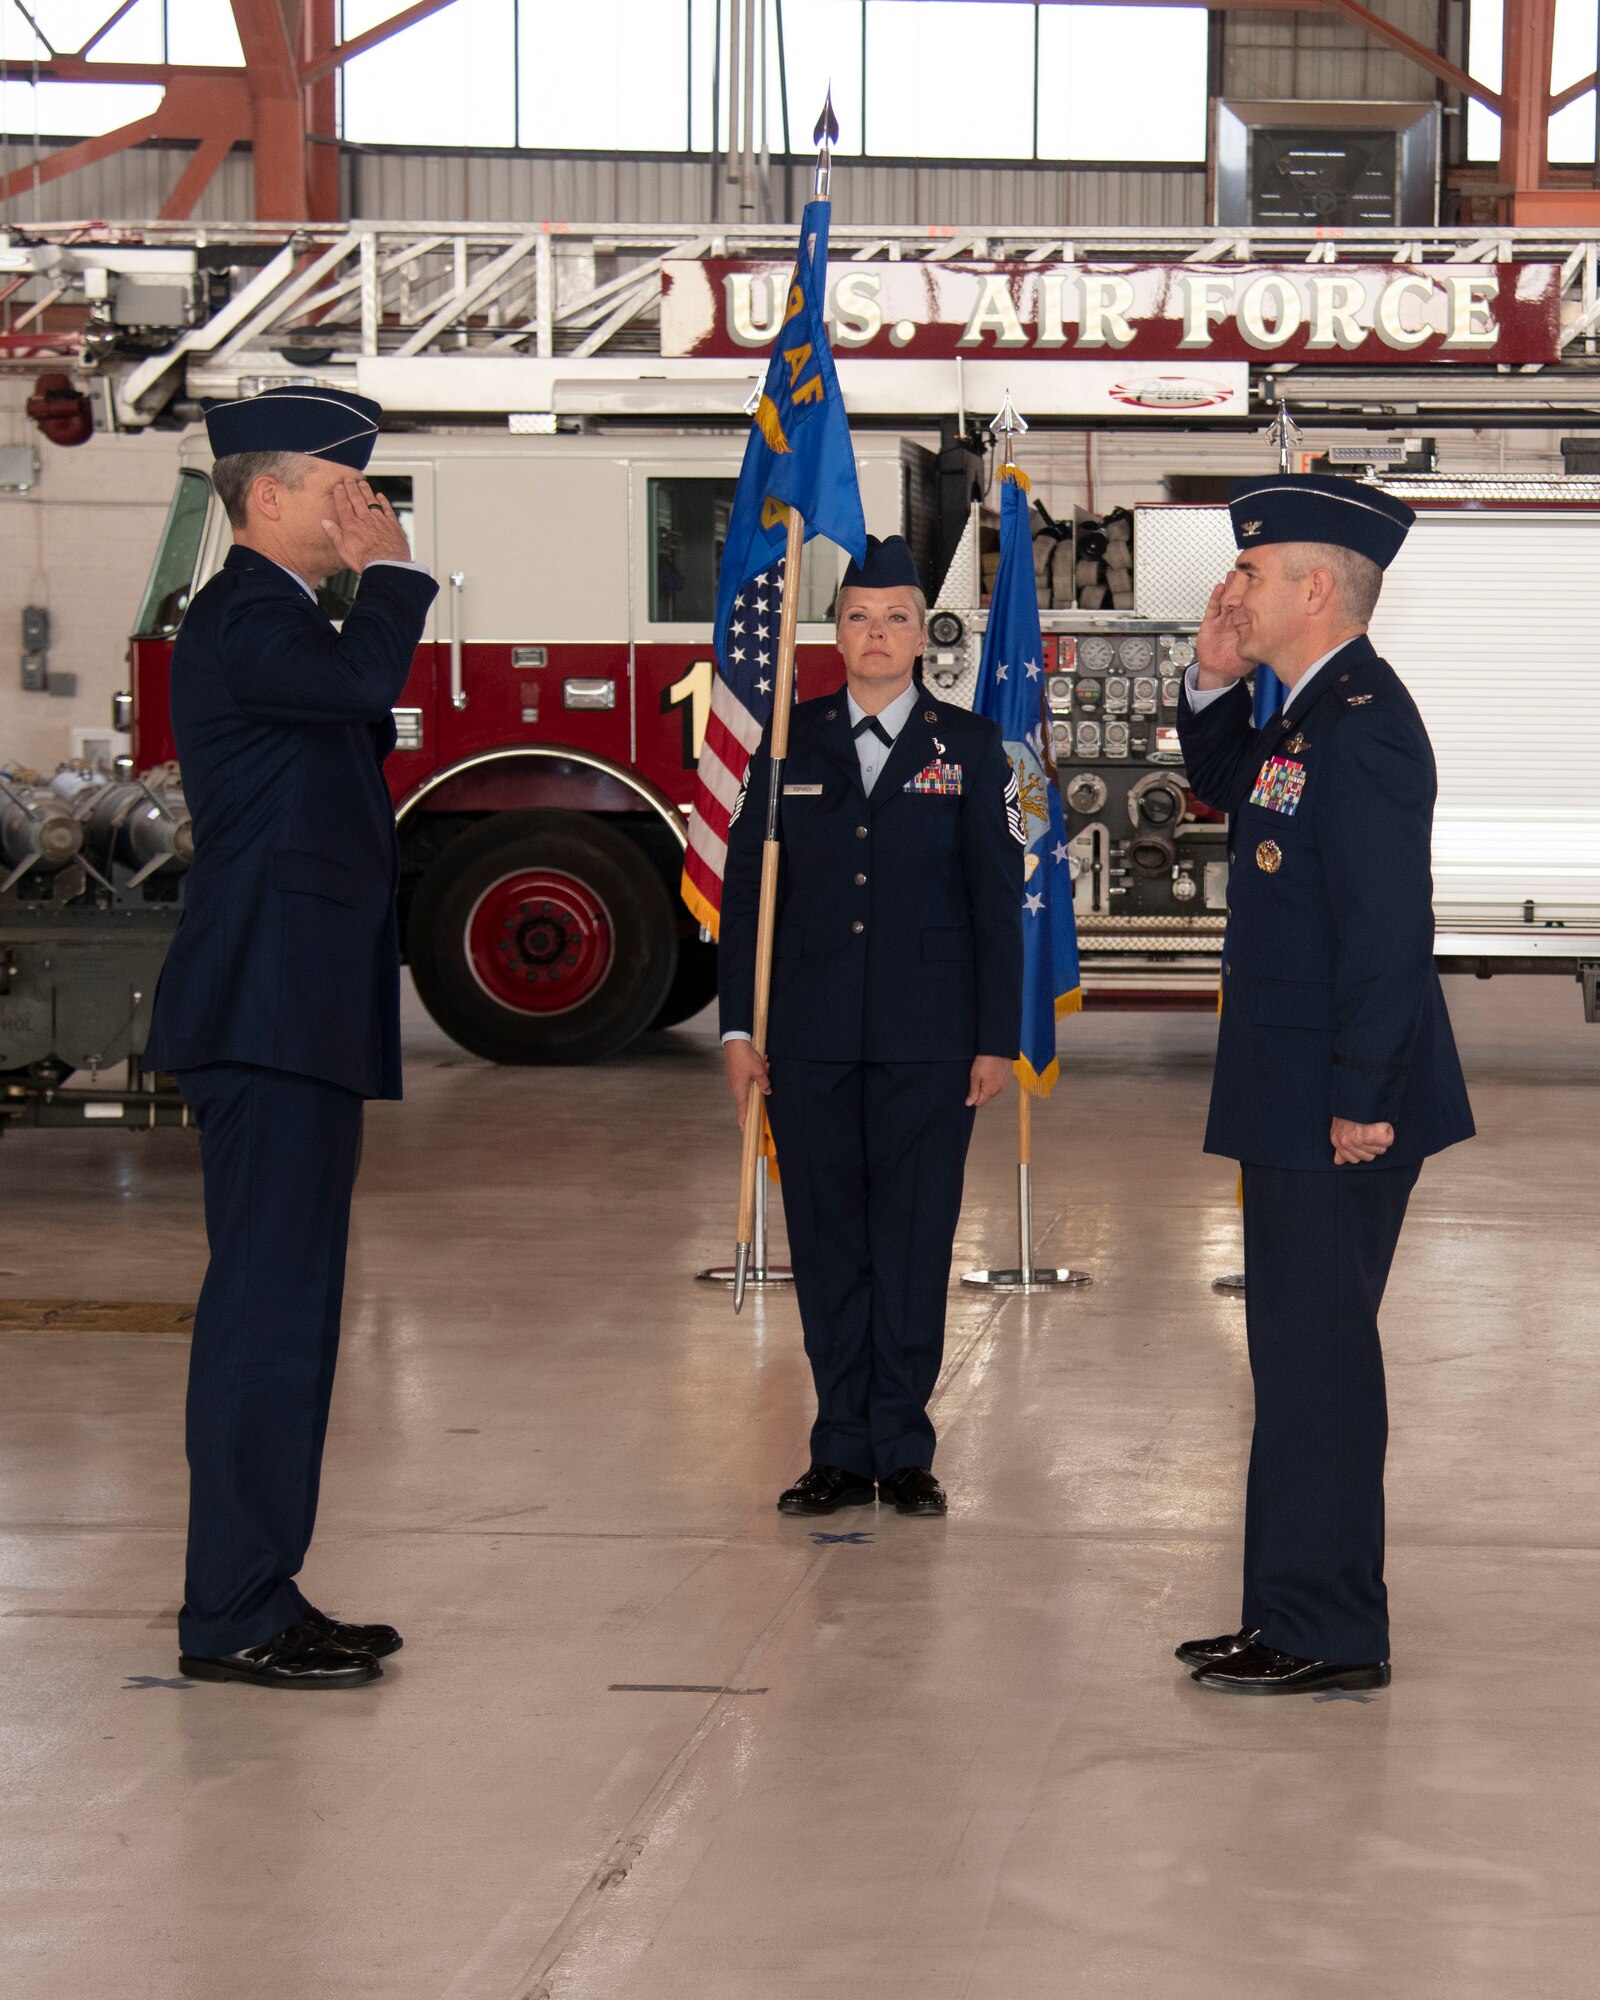 Col. Joseph Campo (right), outgoing 49th Wing commander, relinquishes command to Maj. Gen. Craig Wills (left), 19th Air Force commander, during the 49th WG Change of Command ceremony, May 21, 2020, on Holloman Air Force Base, N.M. Col. Ryan Keeney assumed command of the 49th WG during a formal ceremony. (U.S. Air Force photo Tech. Sgt. BreeAnn Sachs)